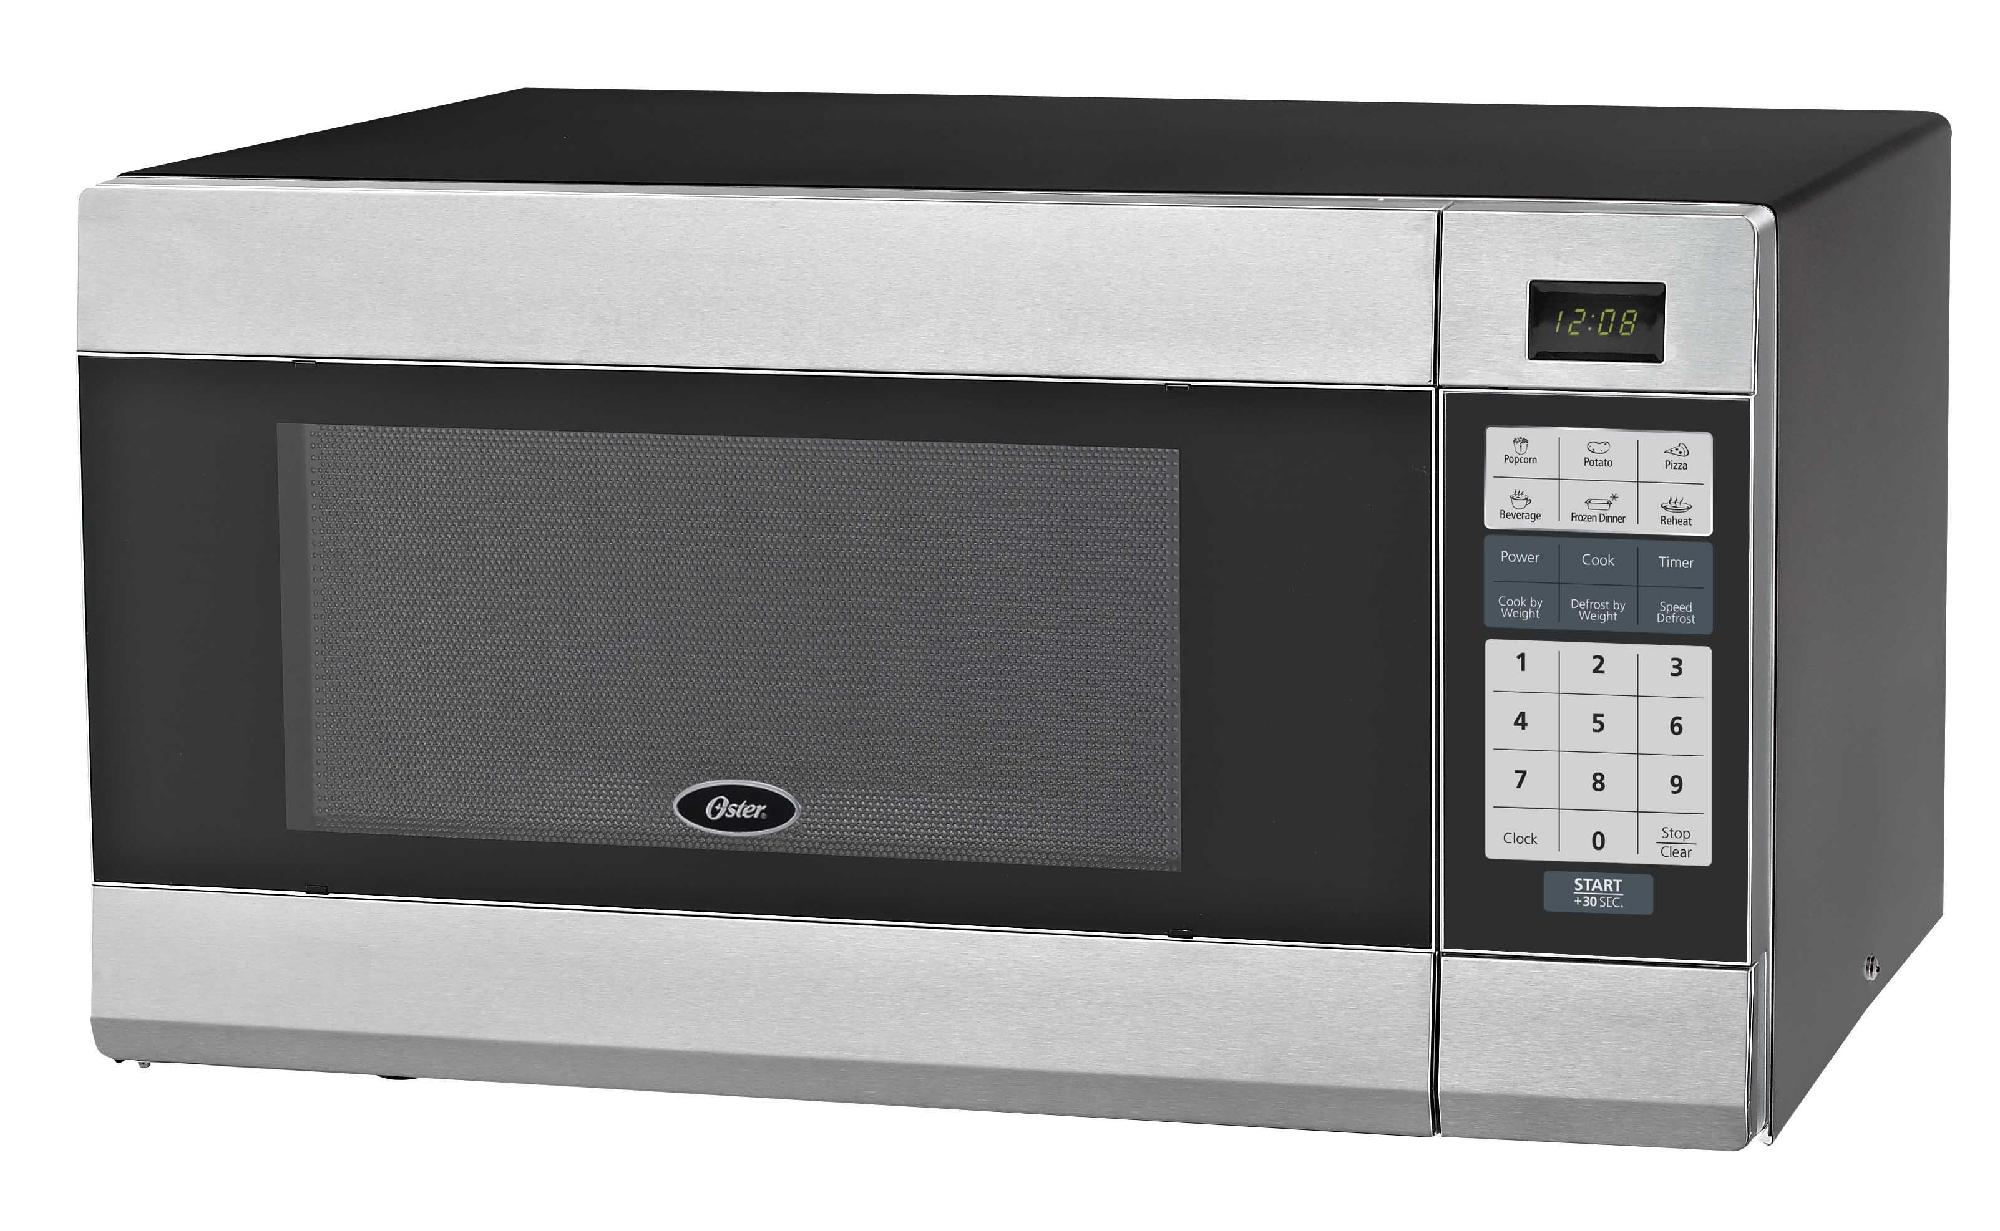 Oster OGZB1101 1.1 Cubic Feet Digital Microwave Oven Review